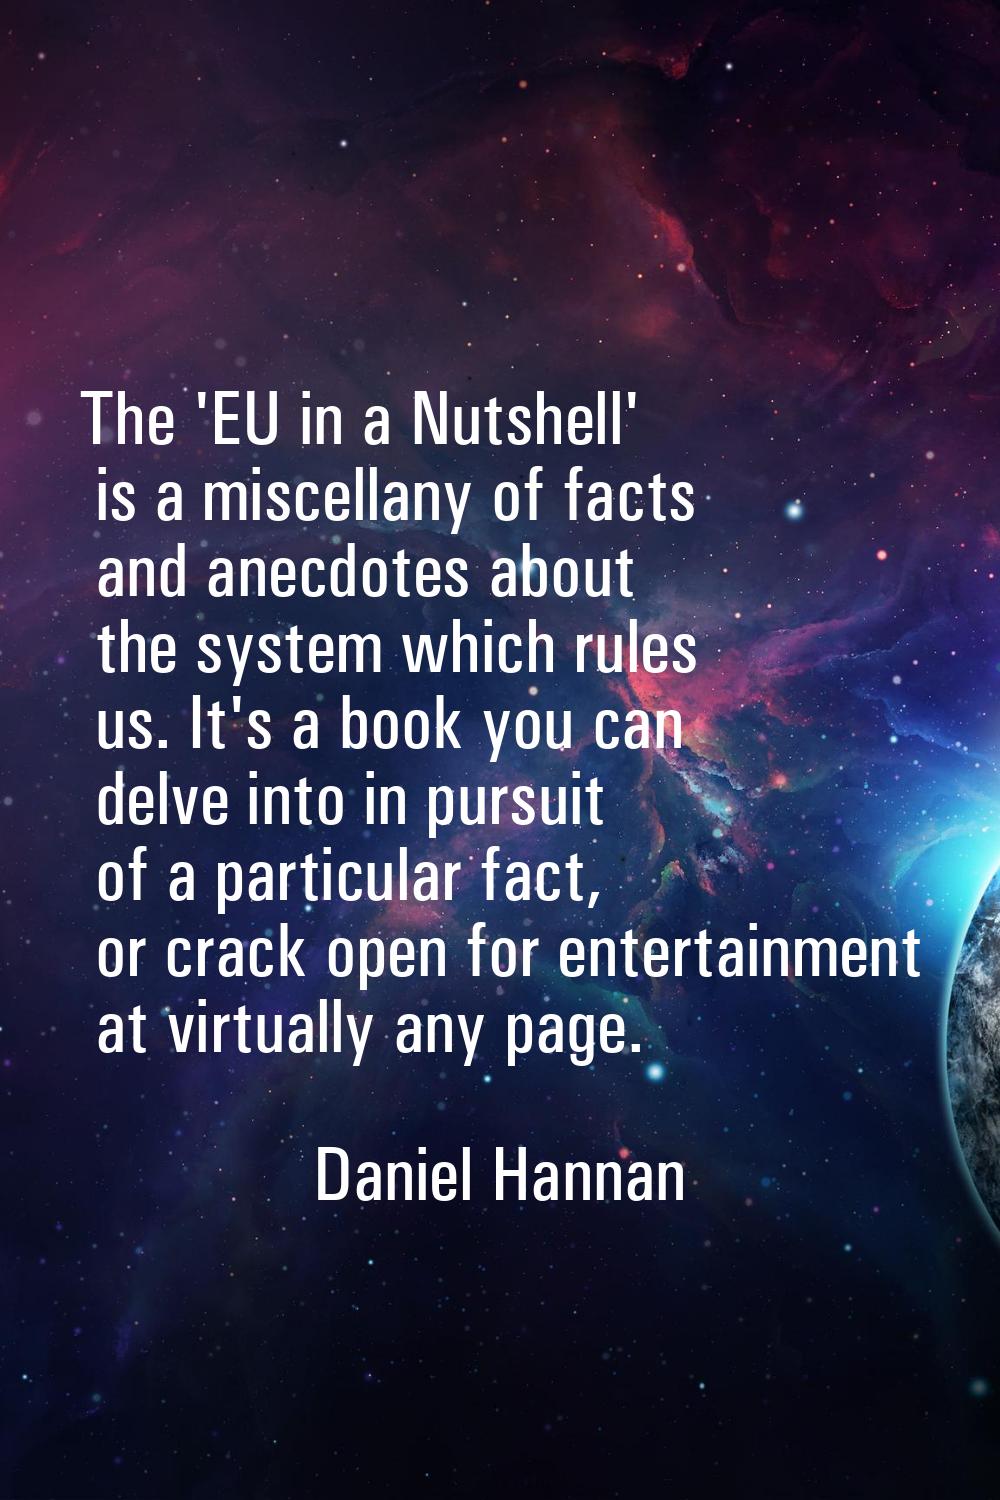 The 'EU in a Nutshell' is a miscellany of facts and anecdotes about the system which rules us. It's